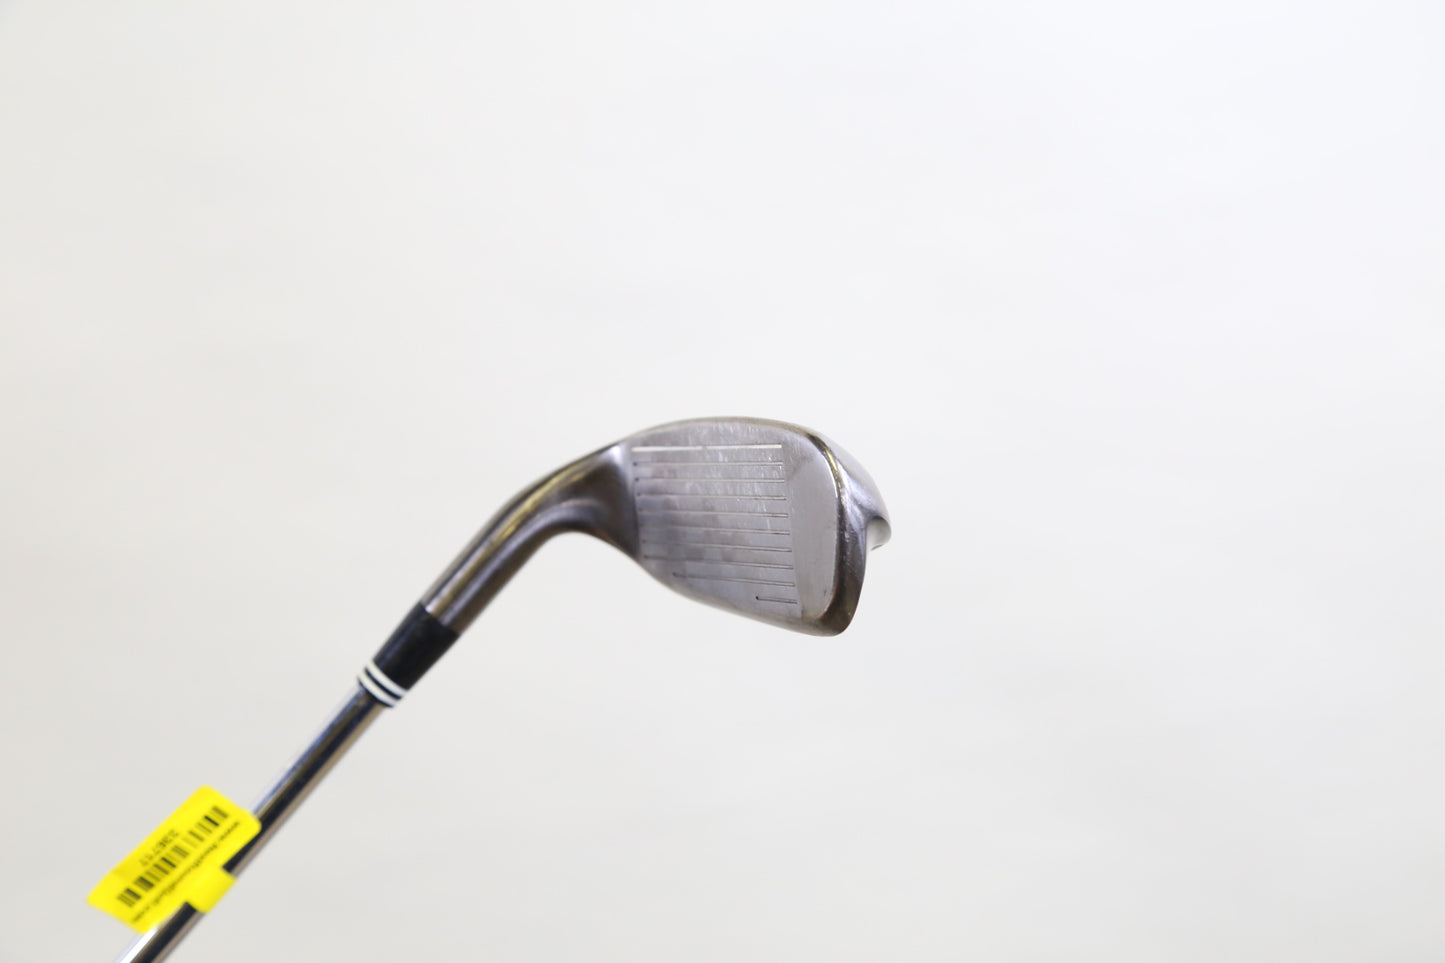 Used Cleveland Niblick Pitching Wedge - Right-Handed - 42 Degrees - Stiff Flex